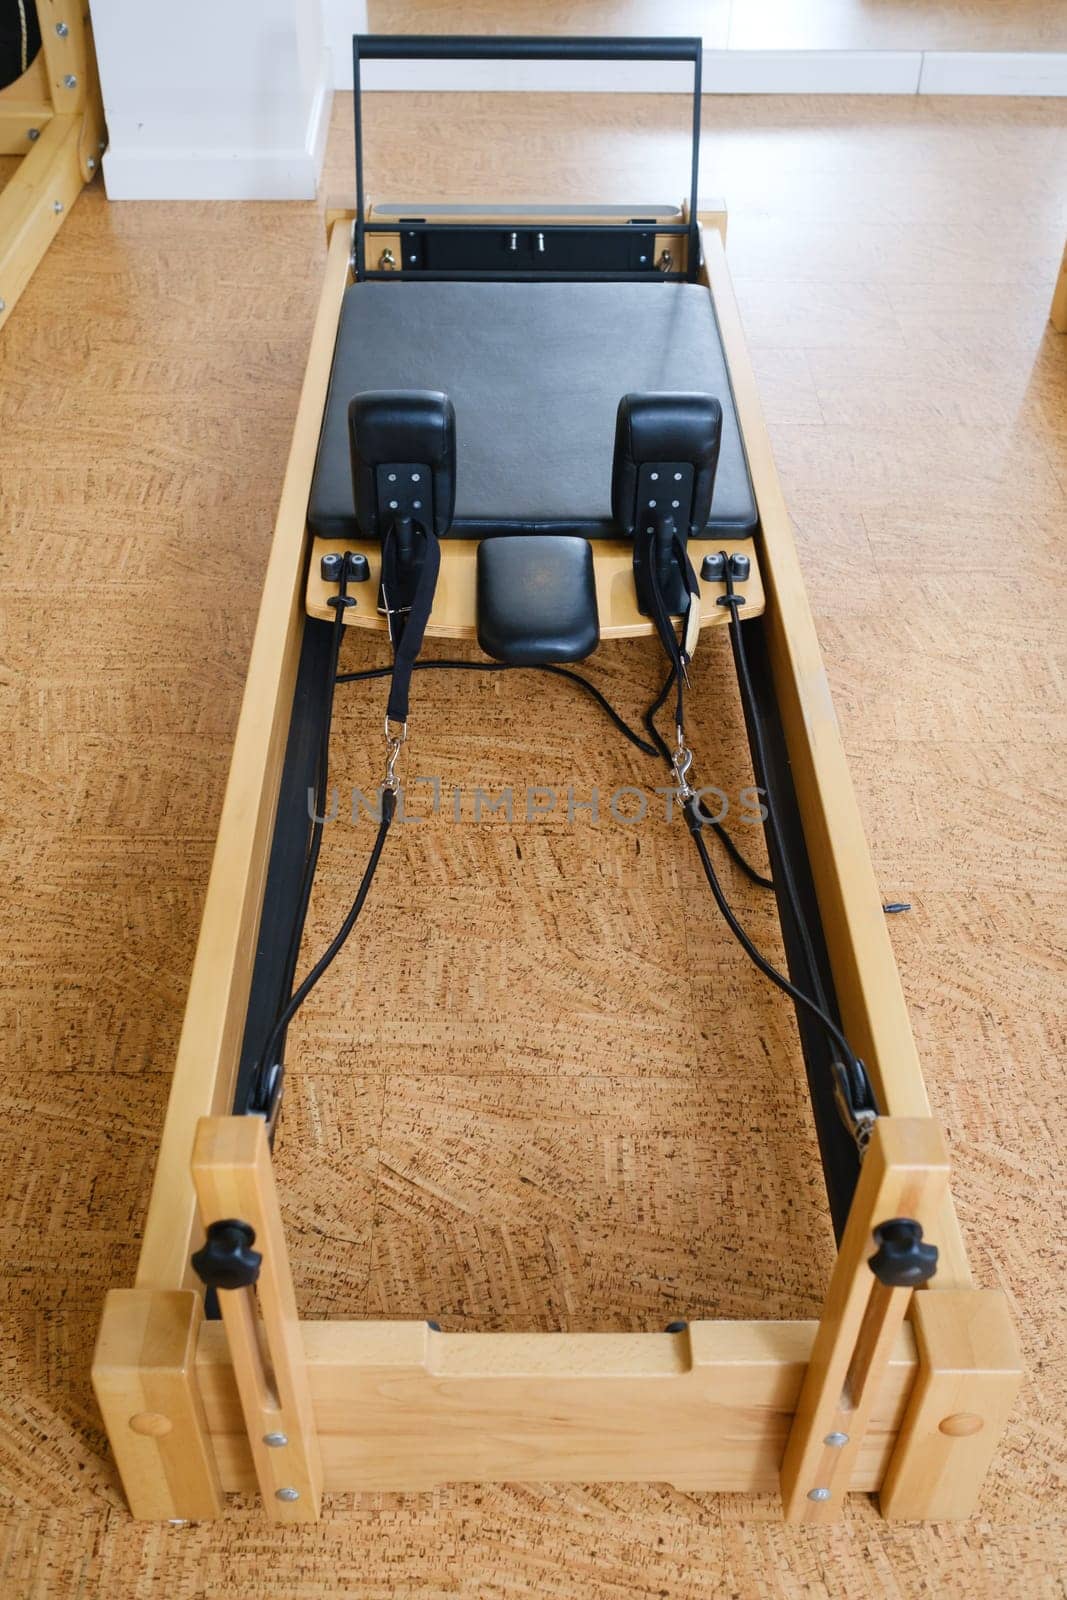 the reformer machine in the pilates room. Yoga equipment by Lobachad